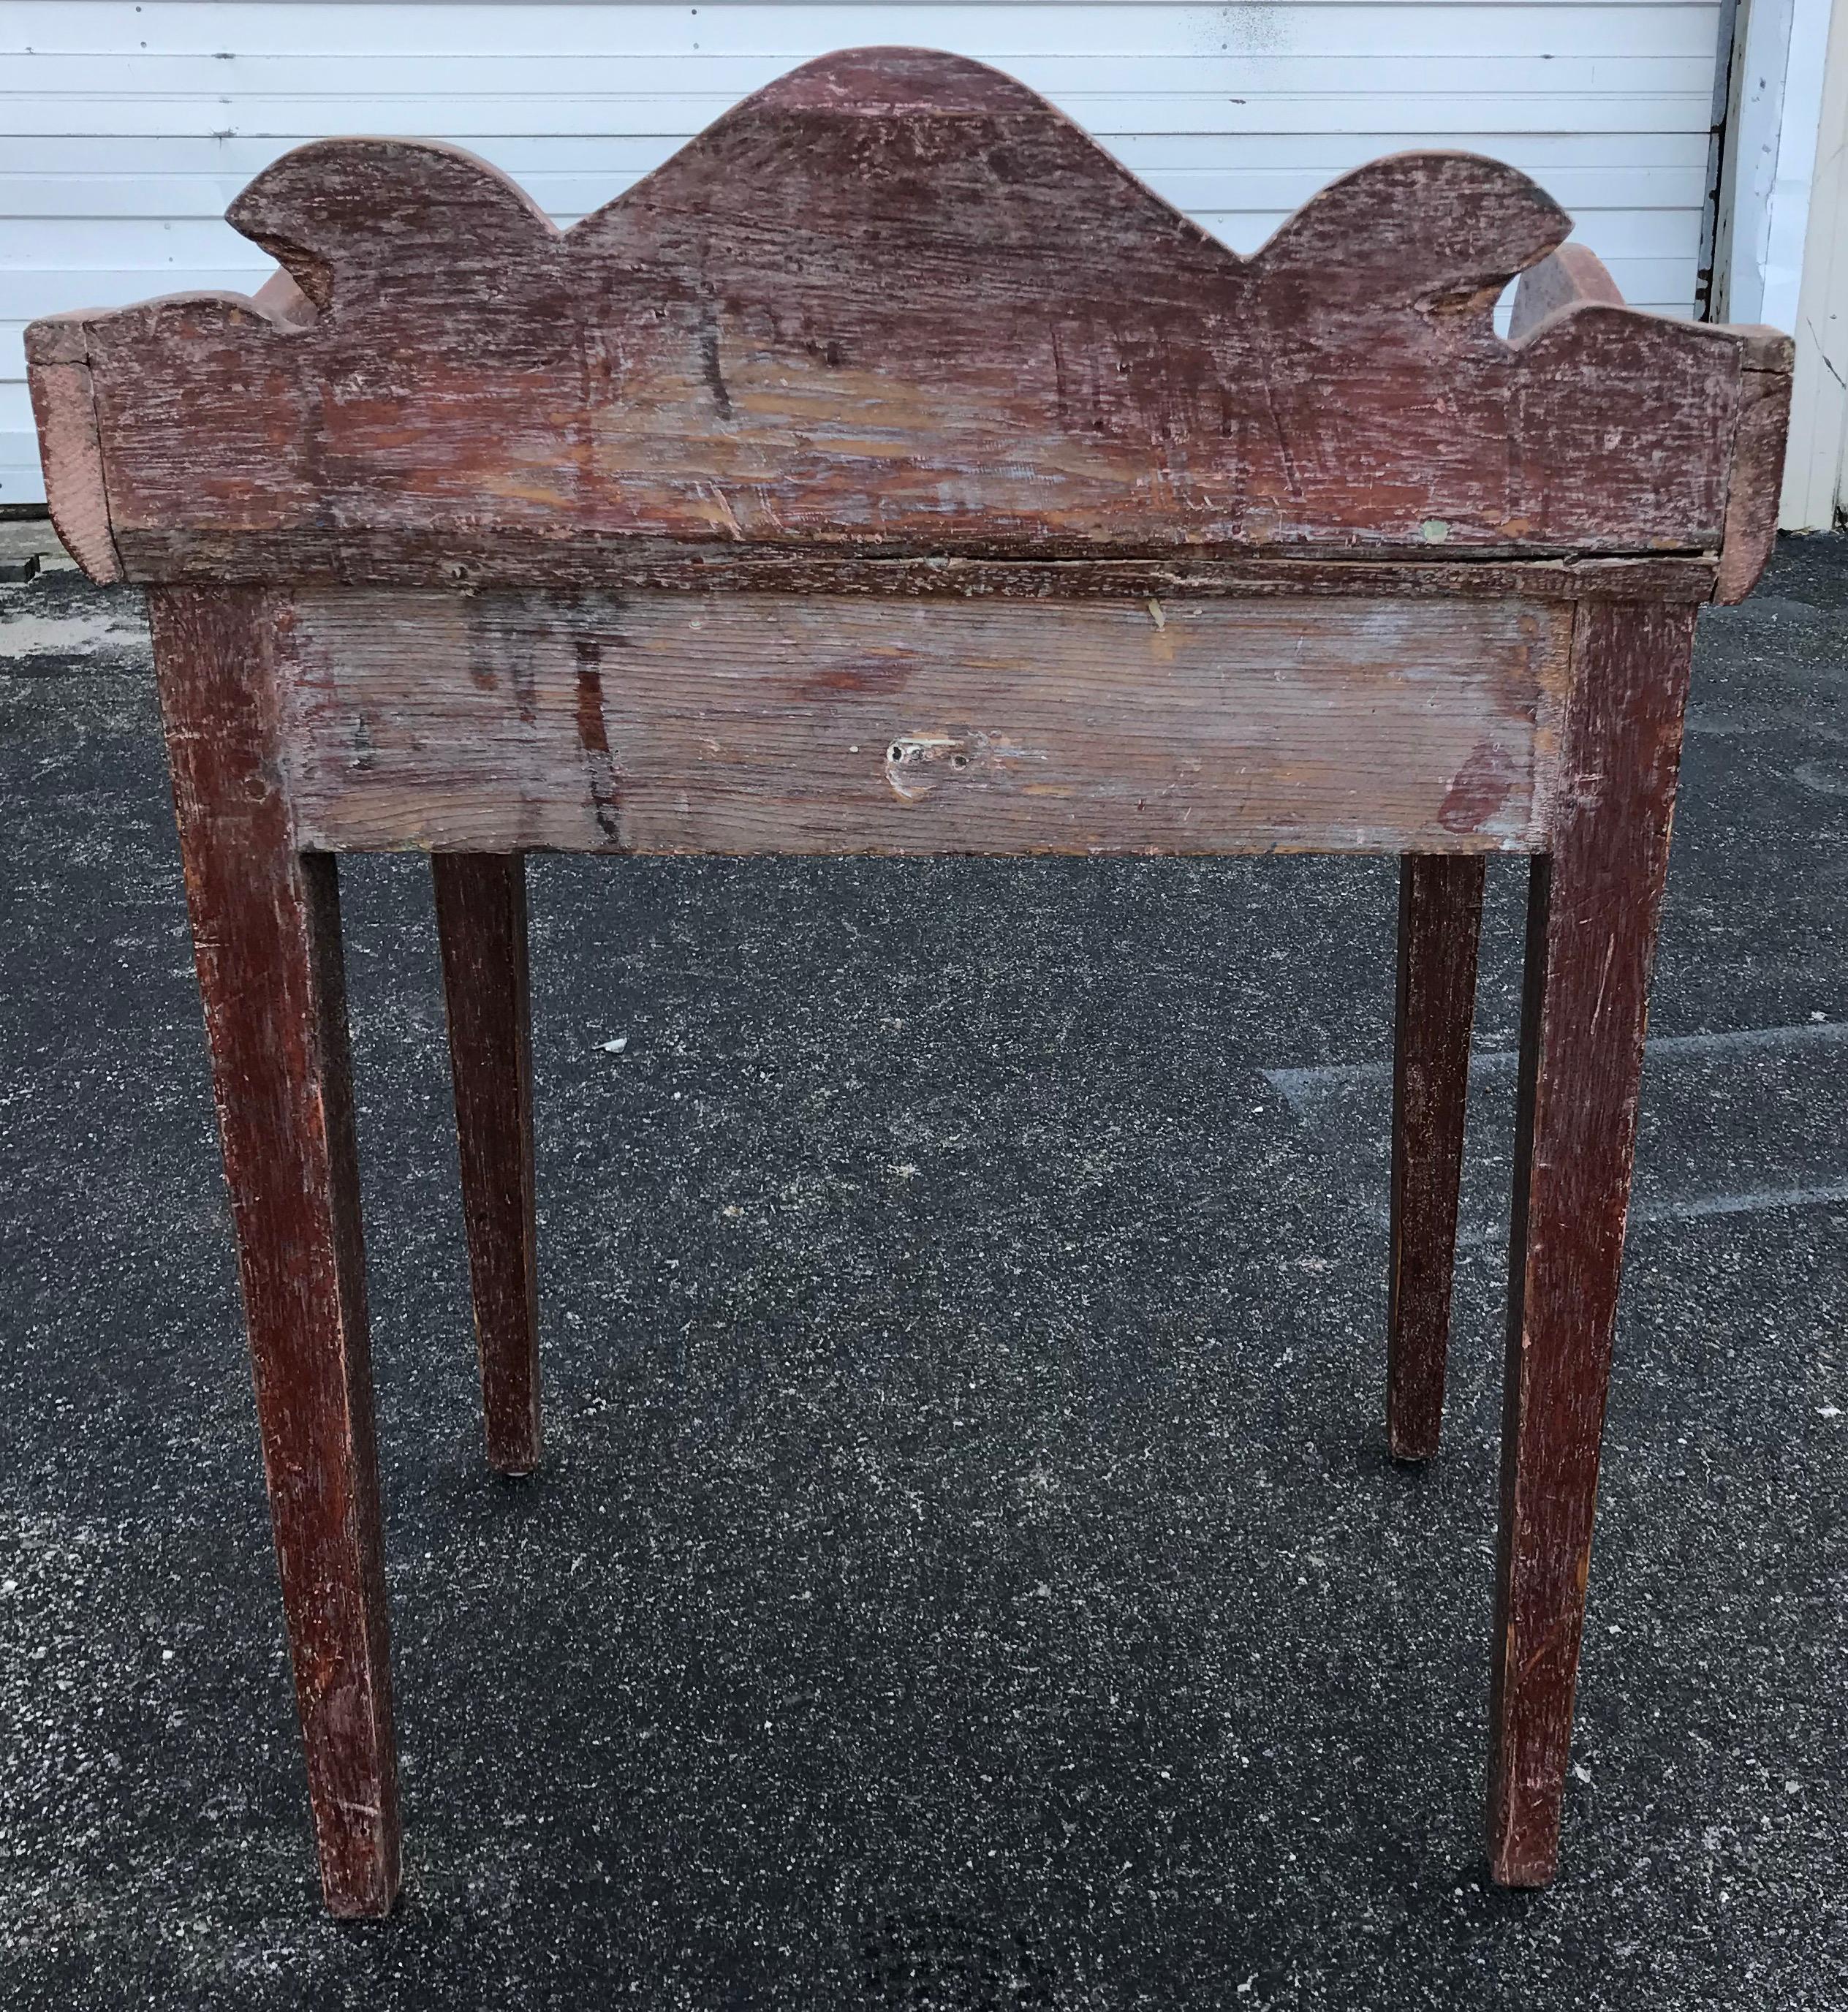 Diminutive 19th century washstand with nicely shaped backsplash, small single drawer and all over old red paint.